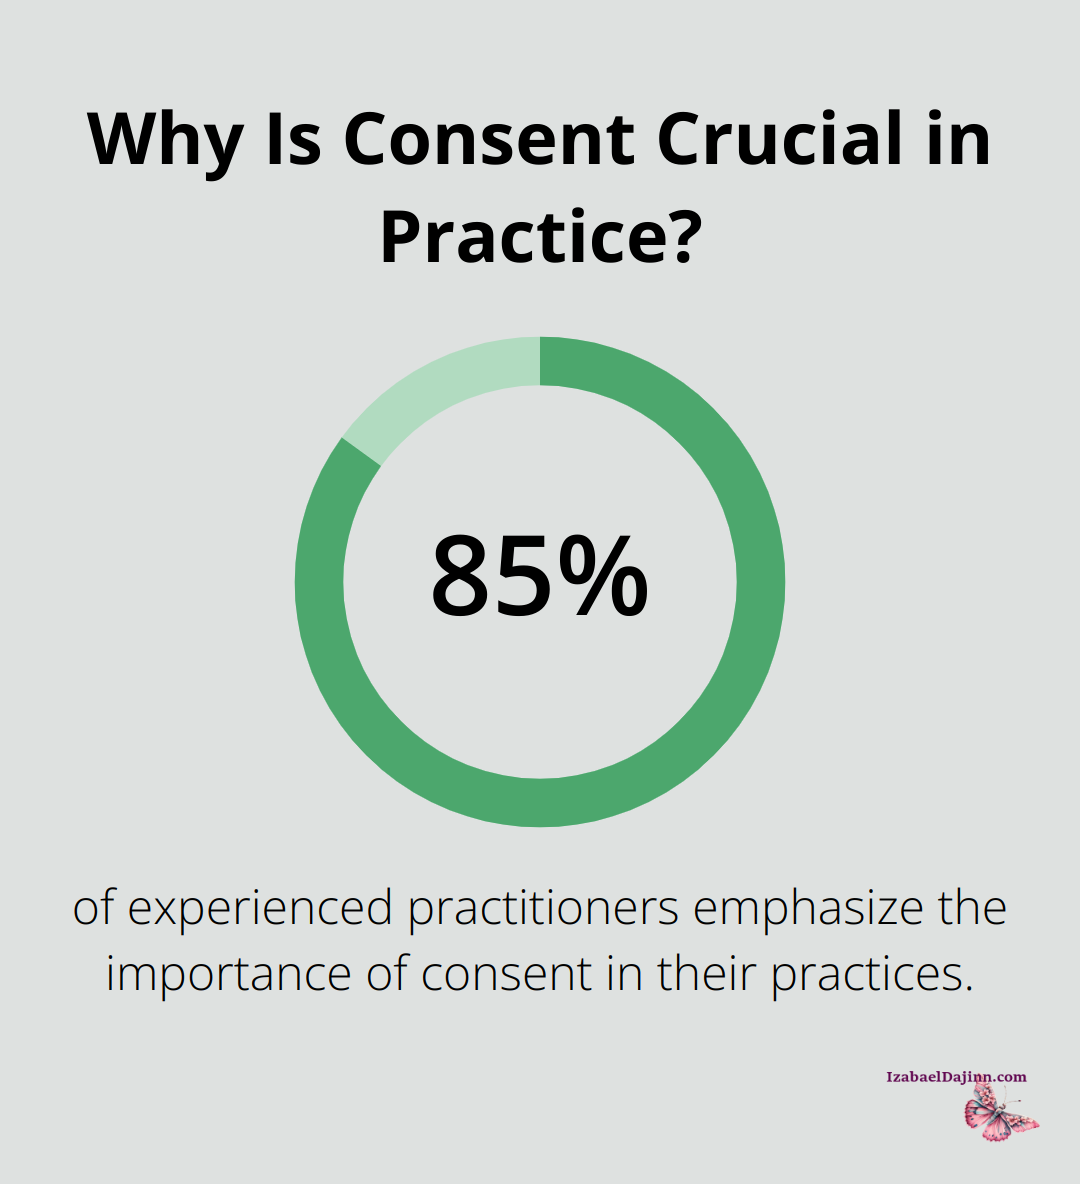 Why Is Consent Crucial in Practice?